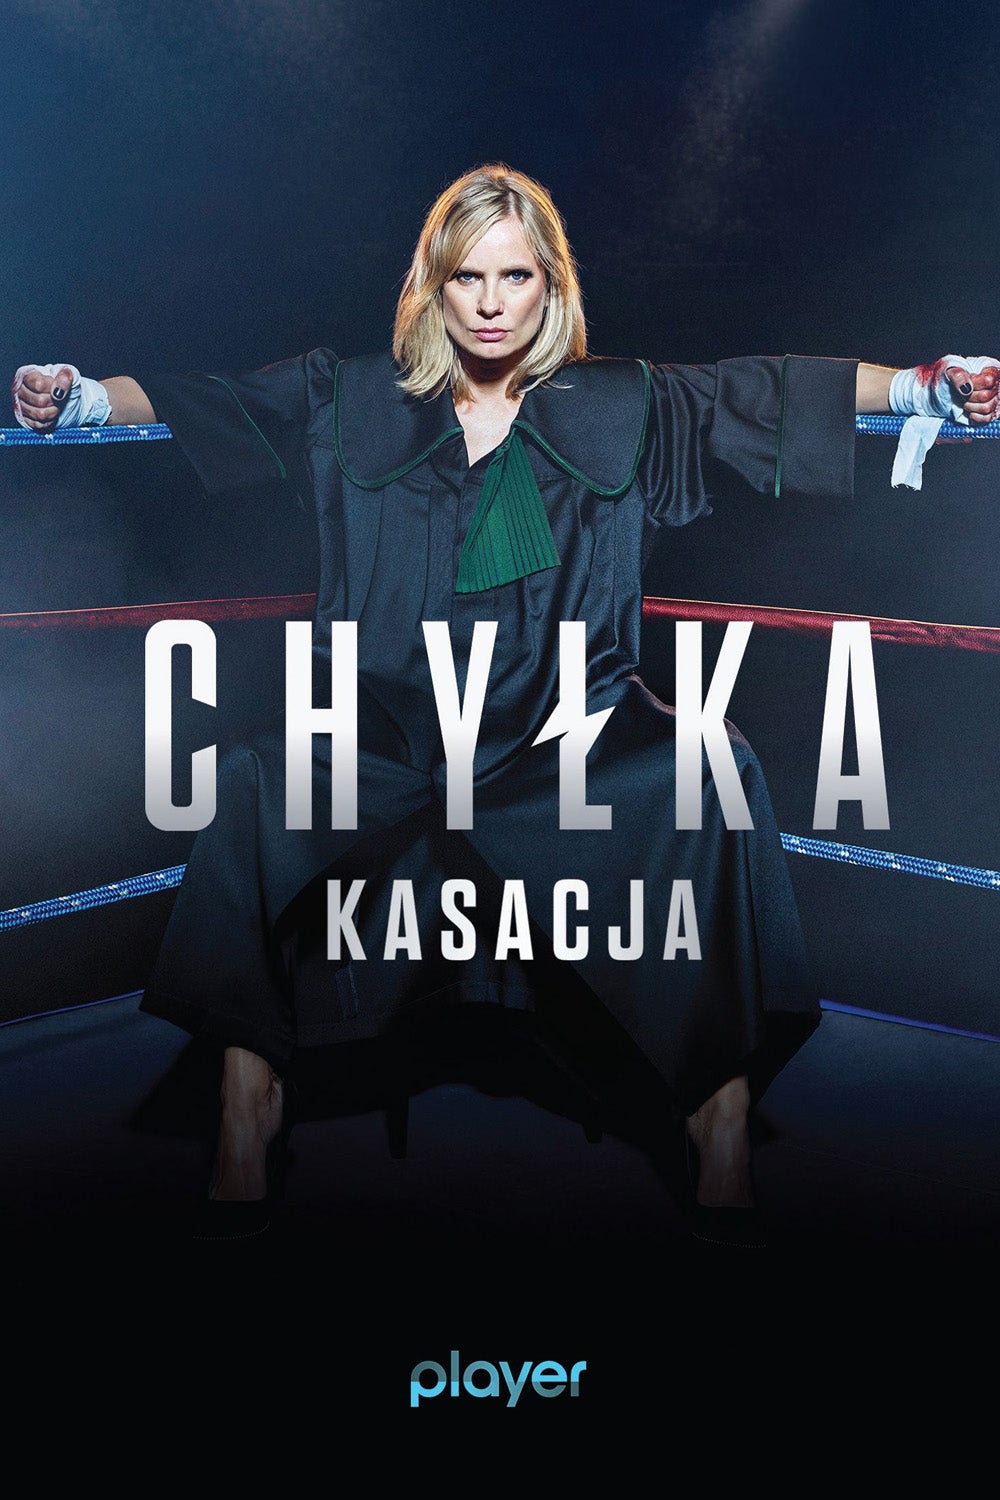 TV ratings for The Disappearance (Chylka) in the United Kingdom. Player.pl TV series